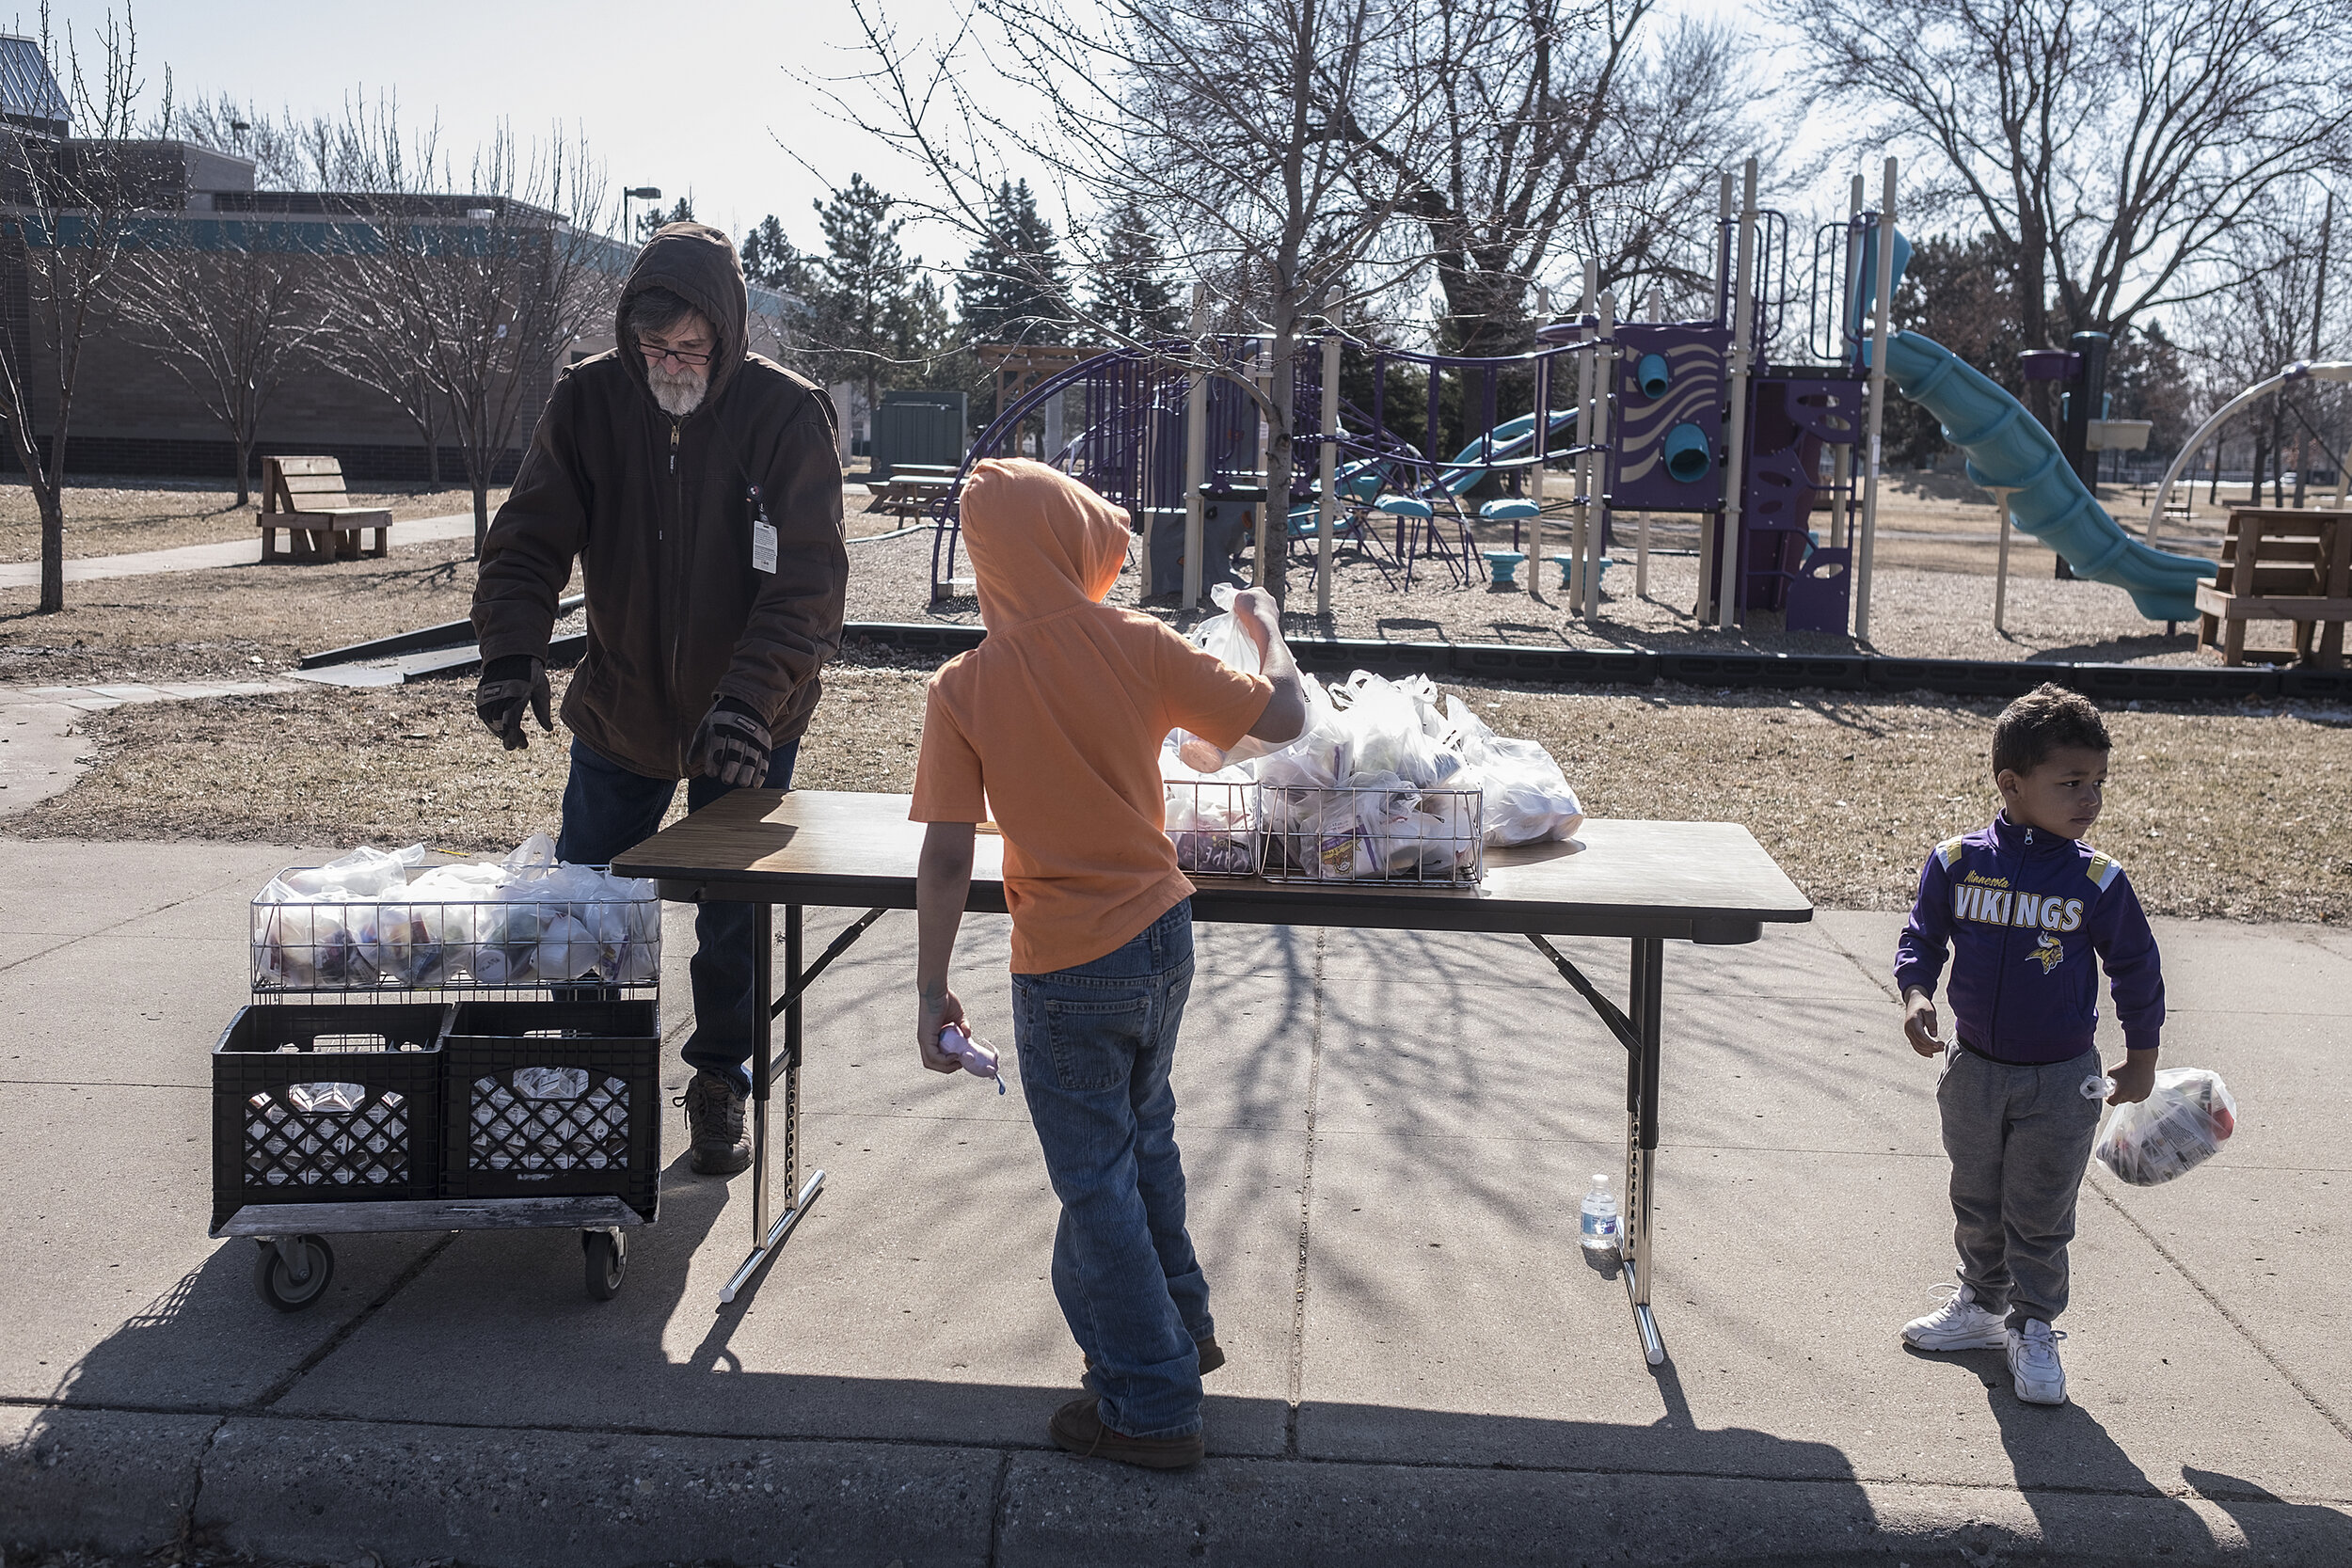  Bus driver Steve Towle reaches for milk while brothers Durell and DeRoyal Perry, right, pick up food bags outside Jenny Lind Elementary School. With classrooms closed, Minneapolis Public Schools continued free student meals.  